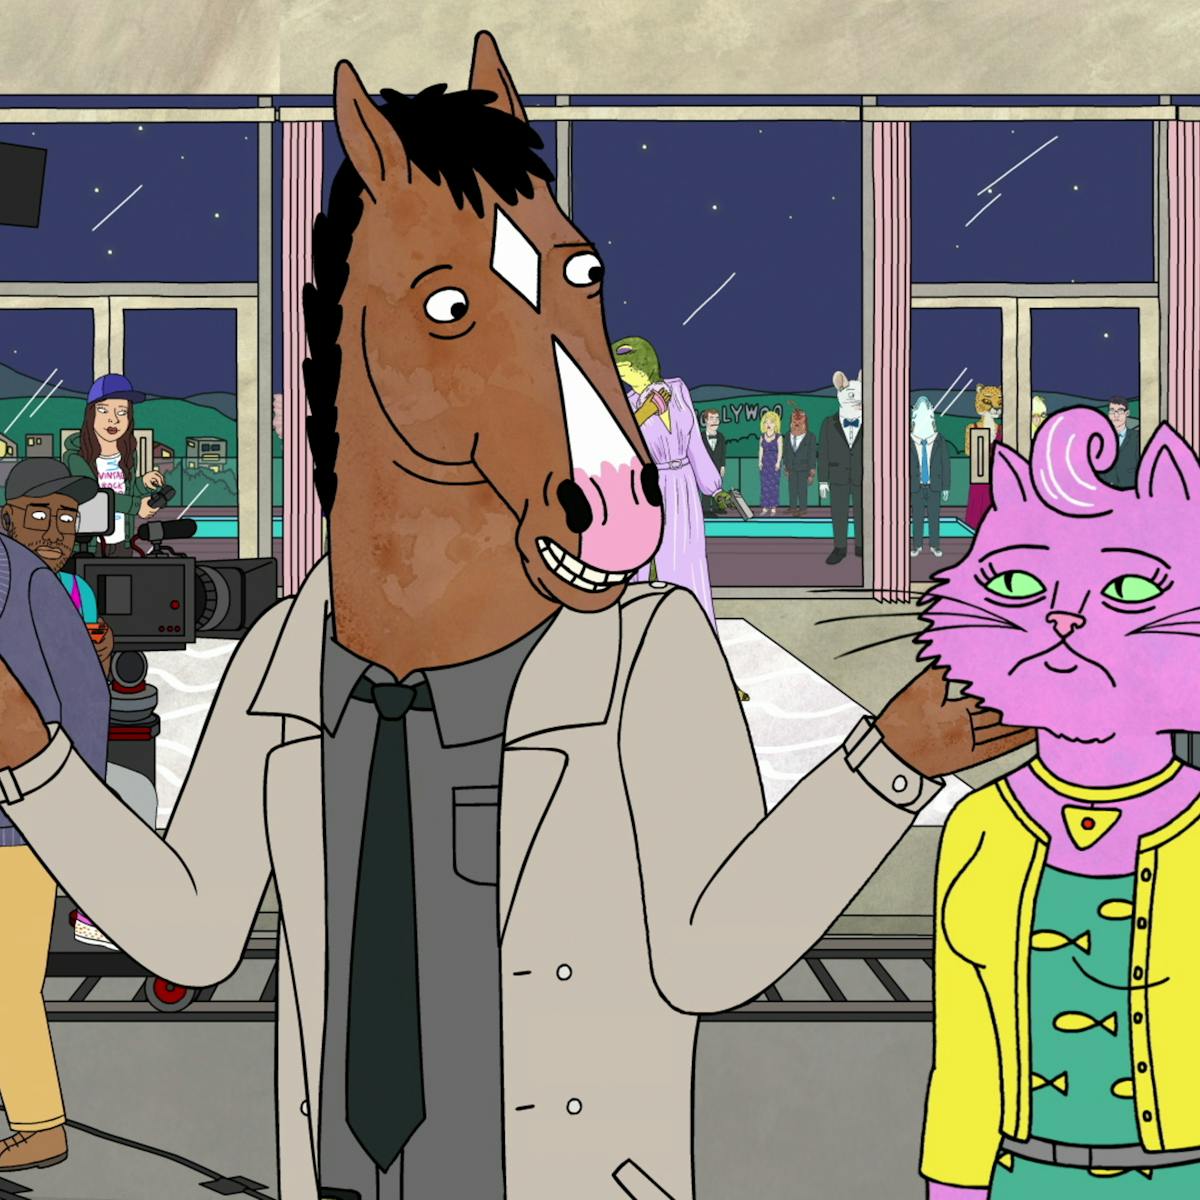 Netflix's BoJack Horseman is one of the most complex animated characters  ever created